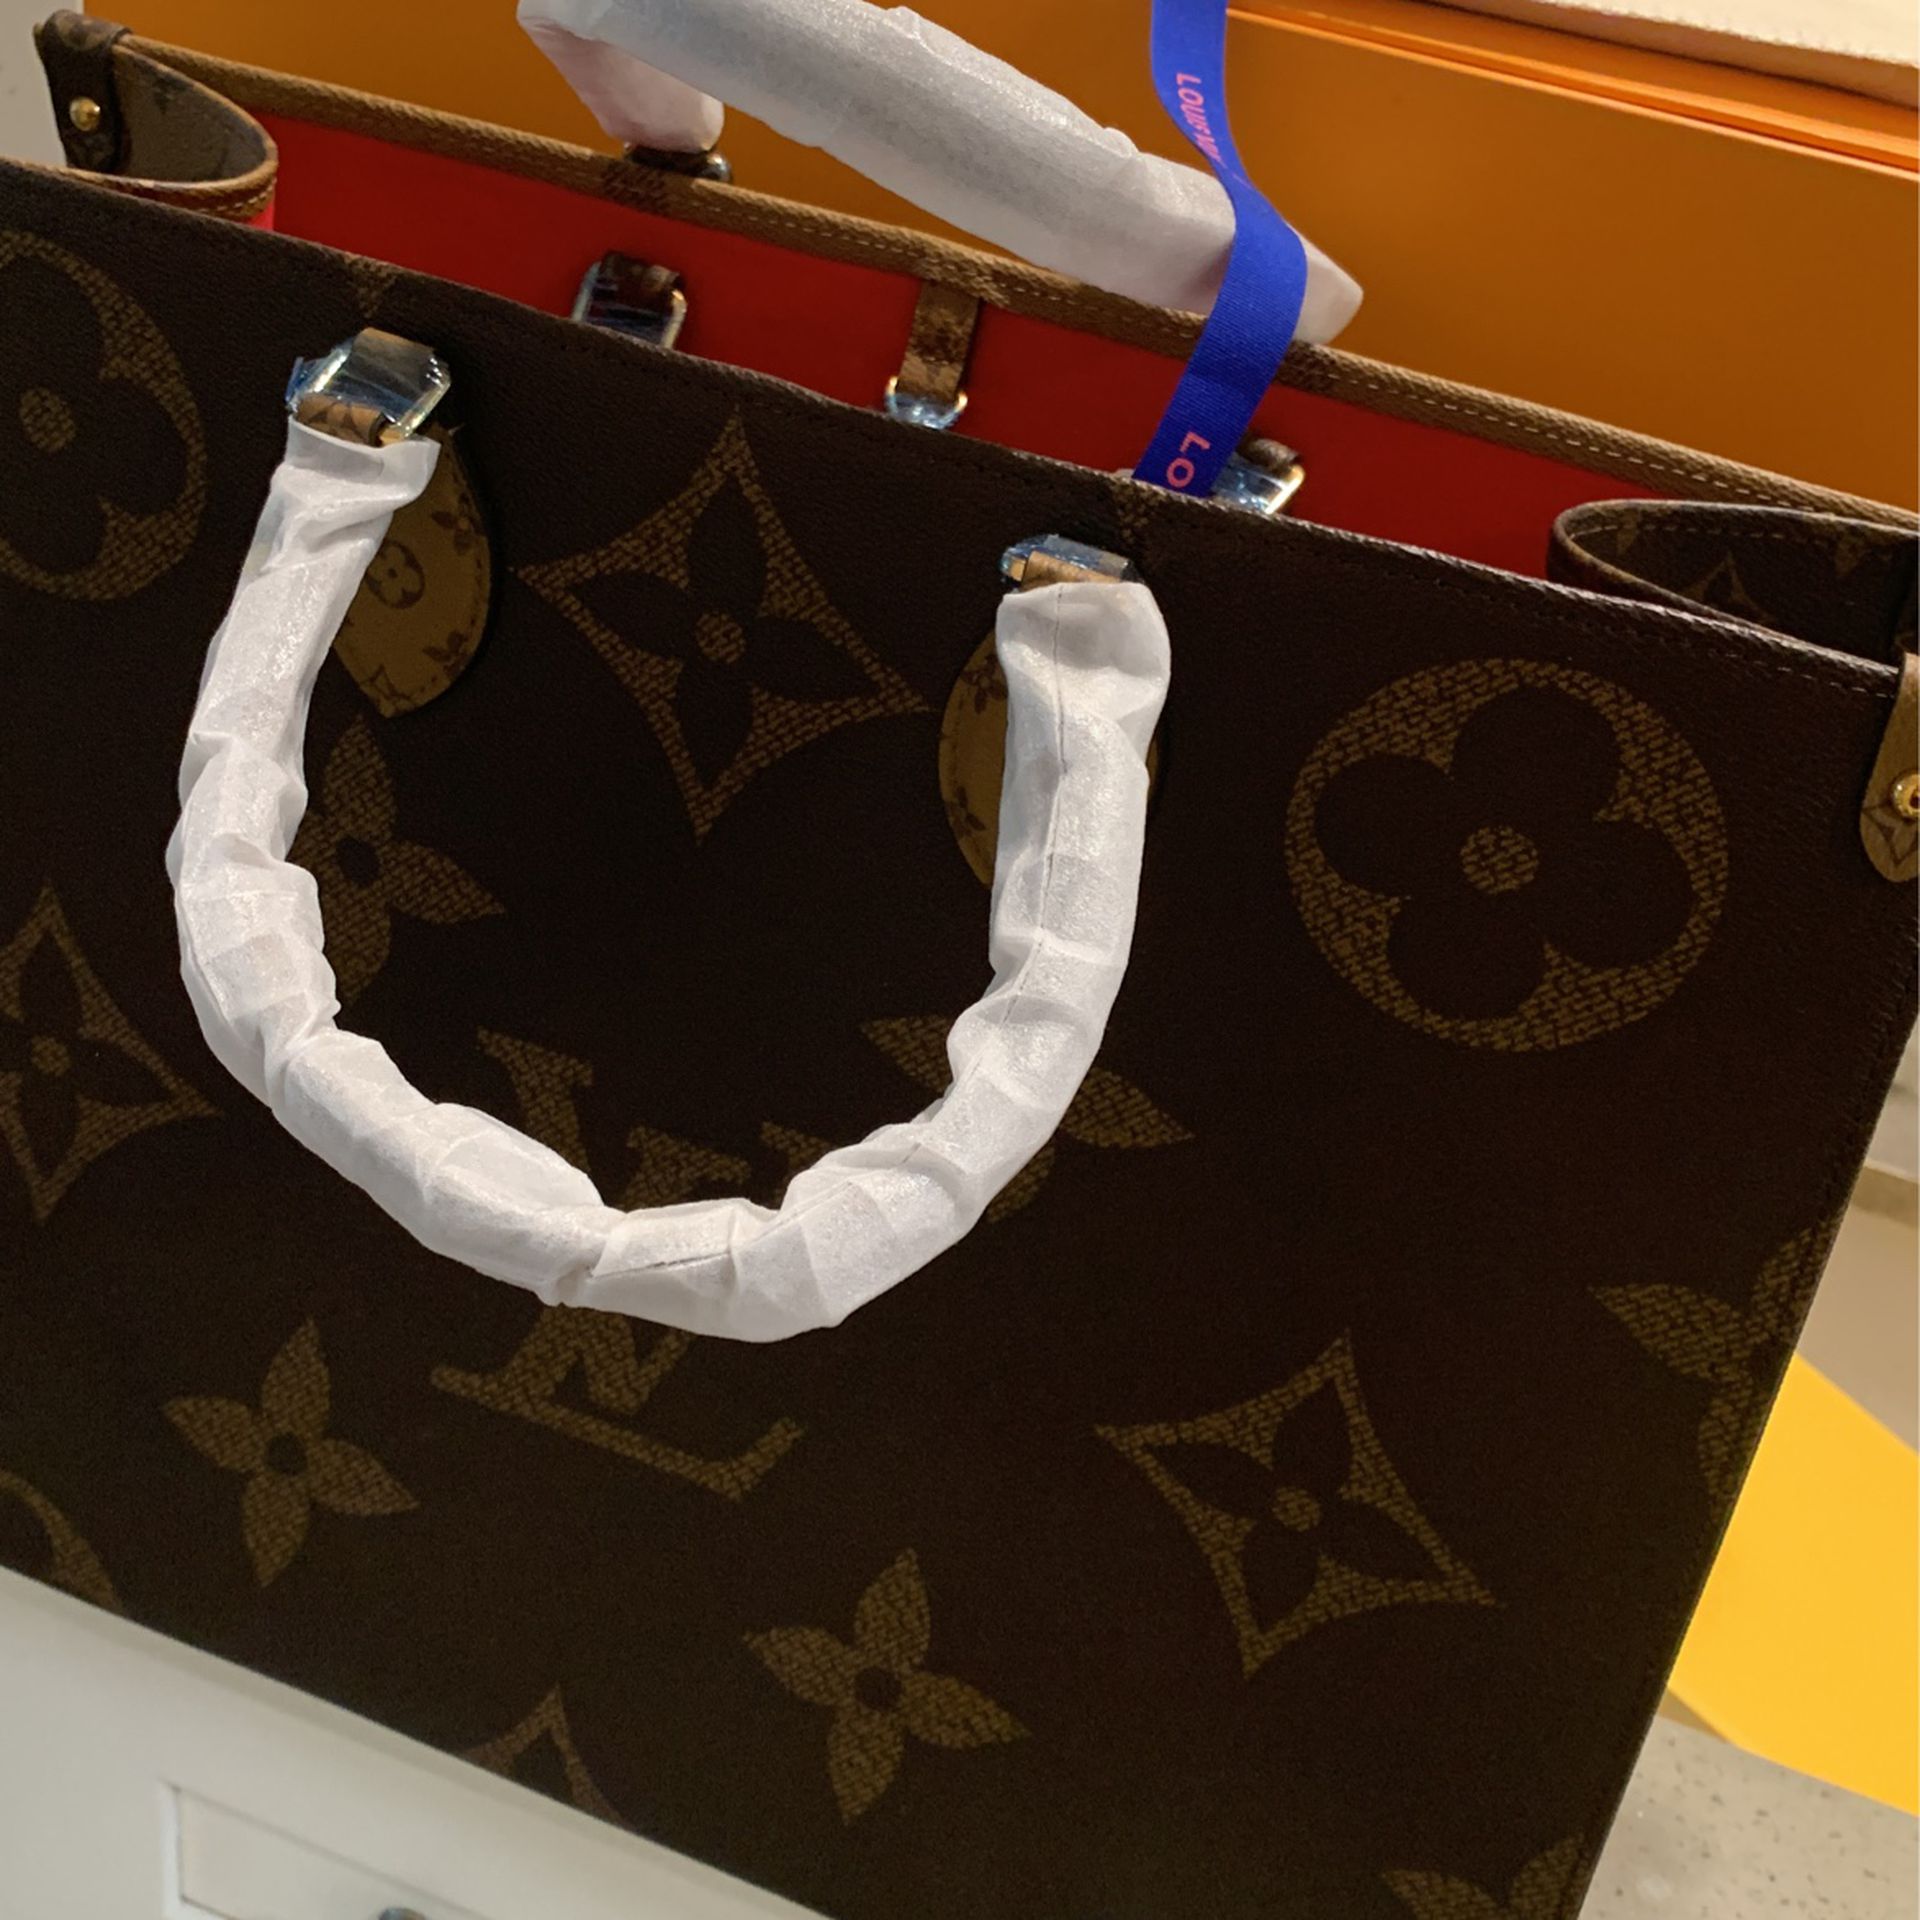 M44576 Onthego Tote Bag Lv for Sale in Los Angeles, CA - OfferUp